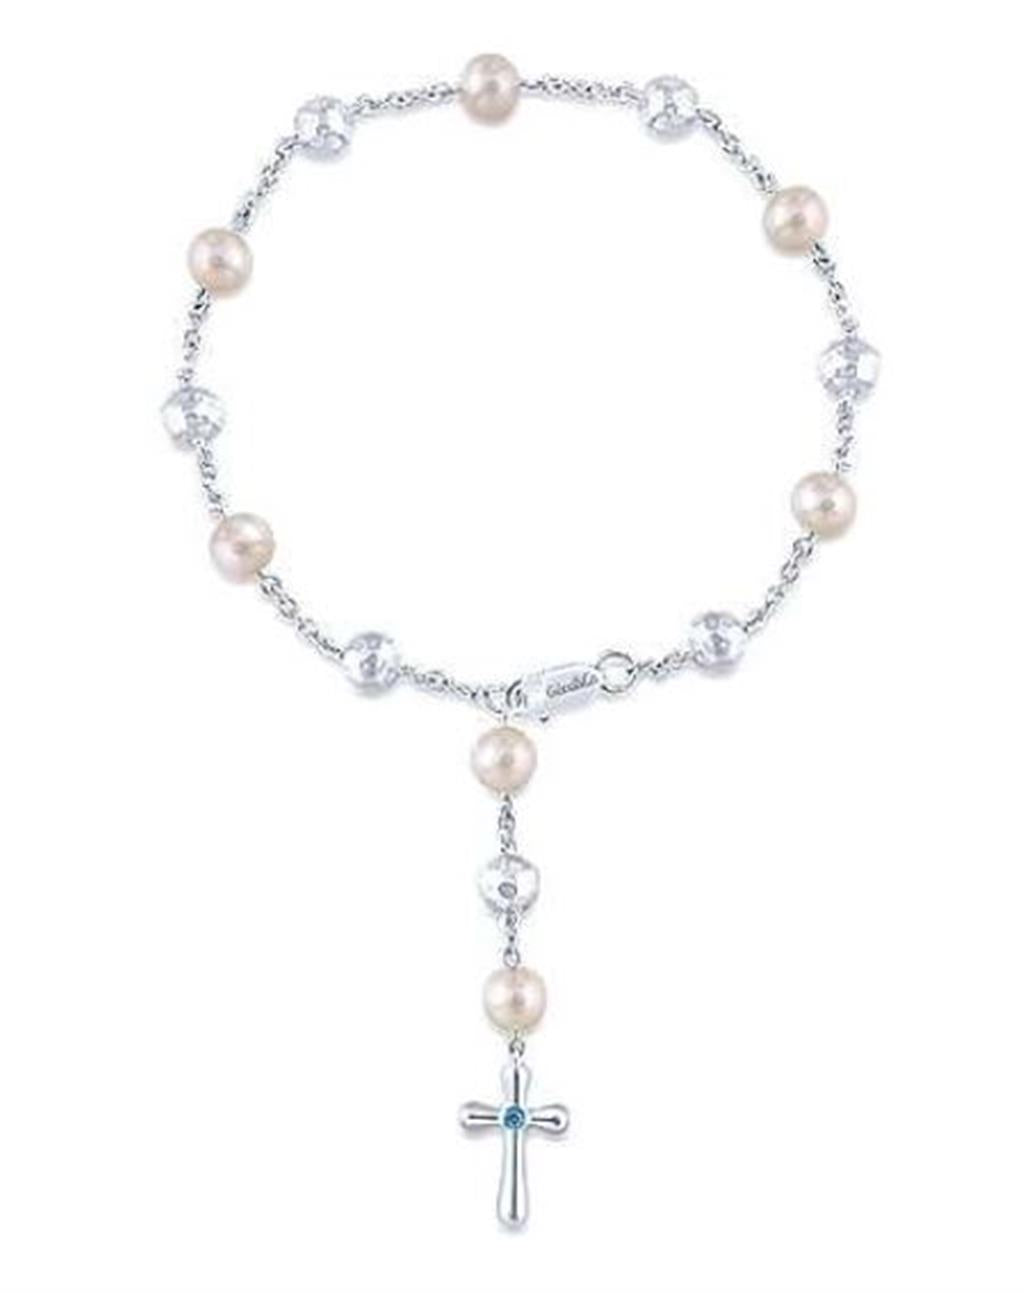 Gabriel & Co. Fashion Sterling Silver Pearl Rosary Bracelet with Blue Topaz Stone Cross